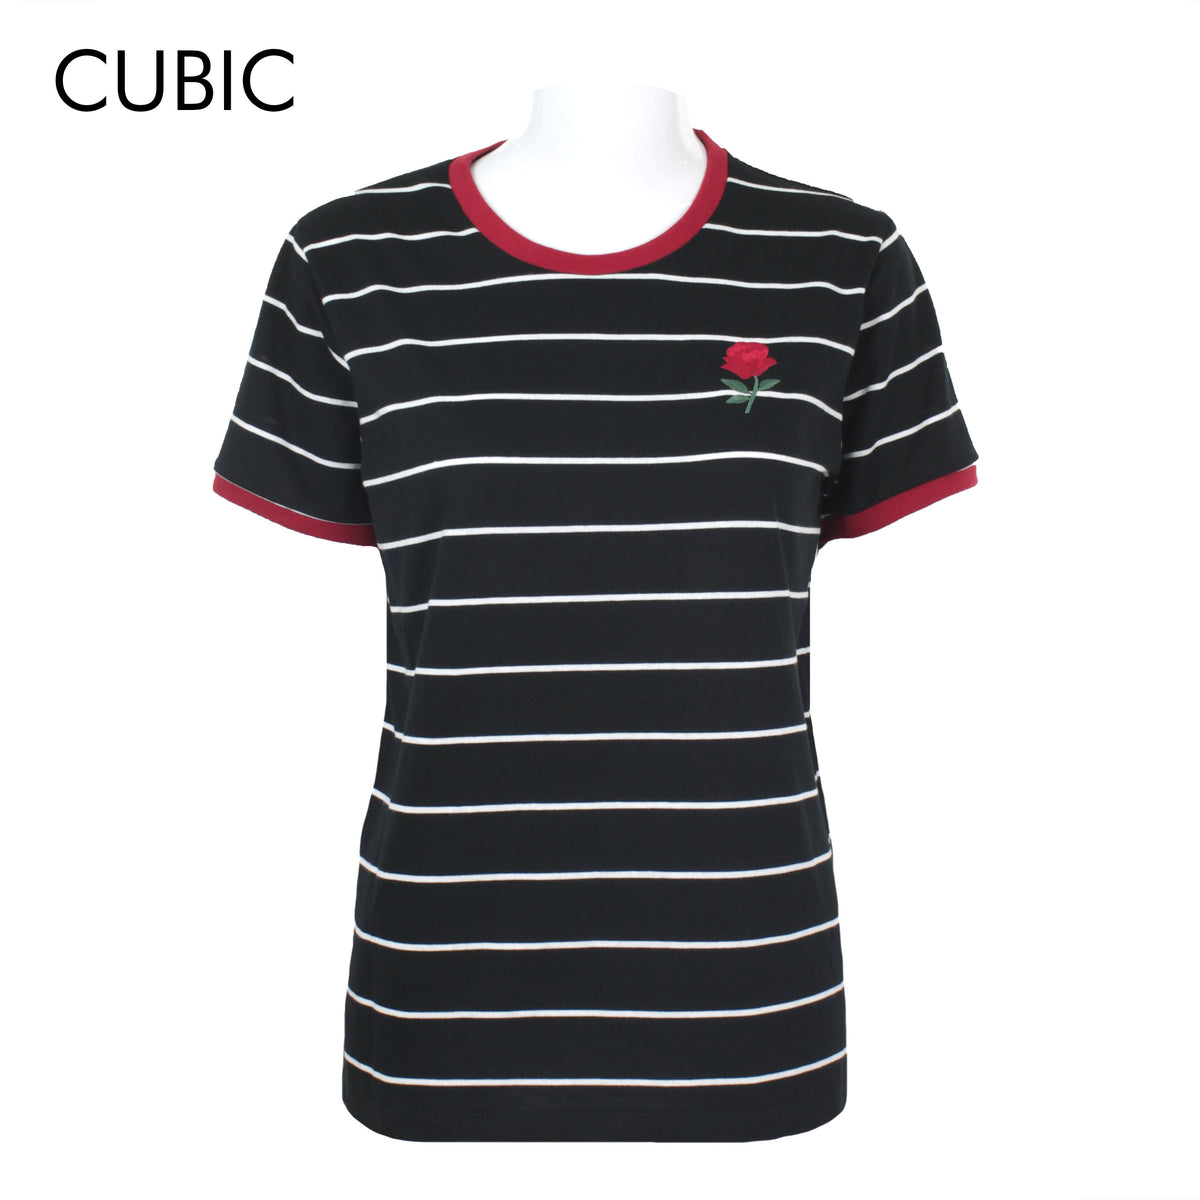 Cubic Ladies Stripes Shirt Sleeve Round Neck Top Tops Tee T Shirt T-Shirt w/ Rose Embro - CLS2201R